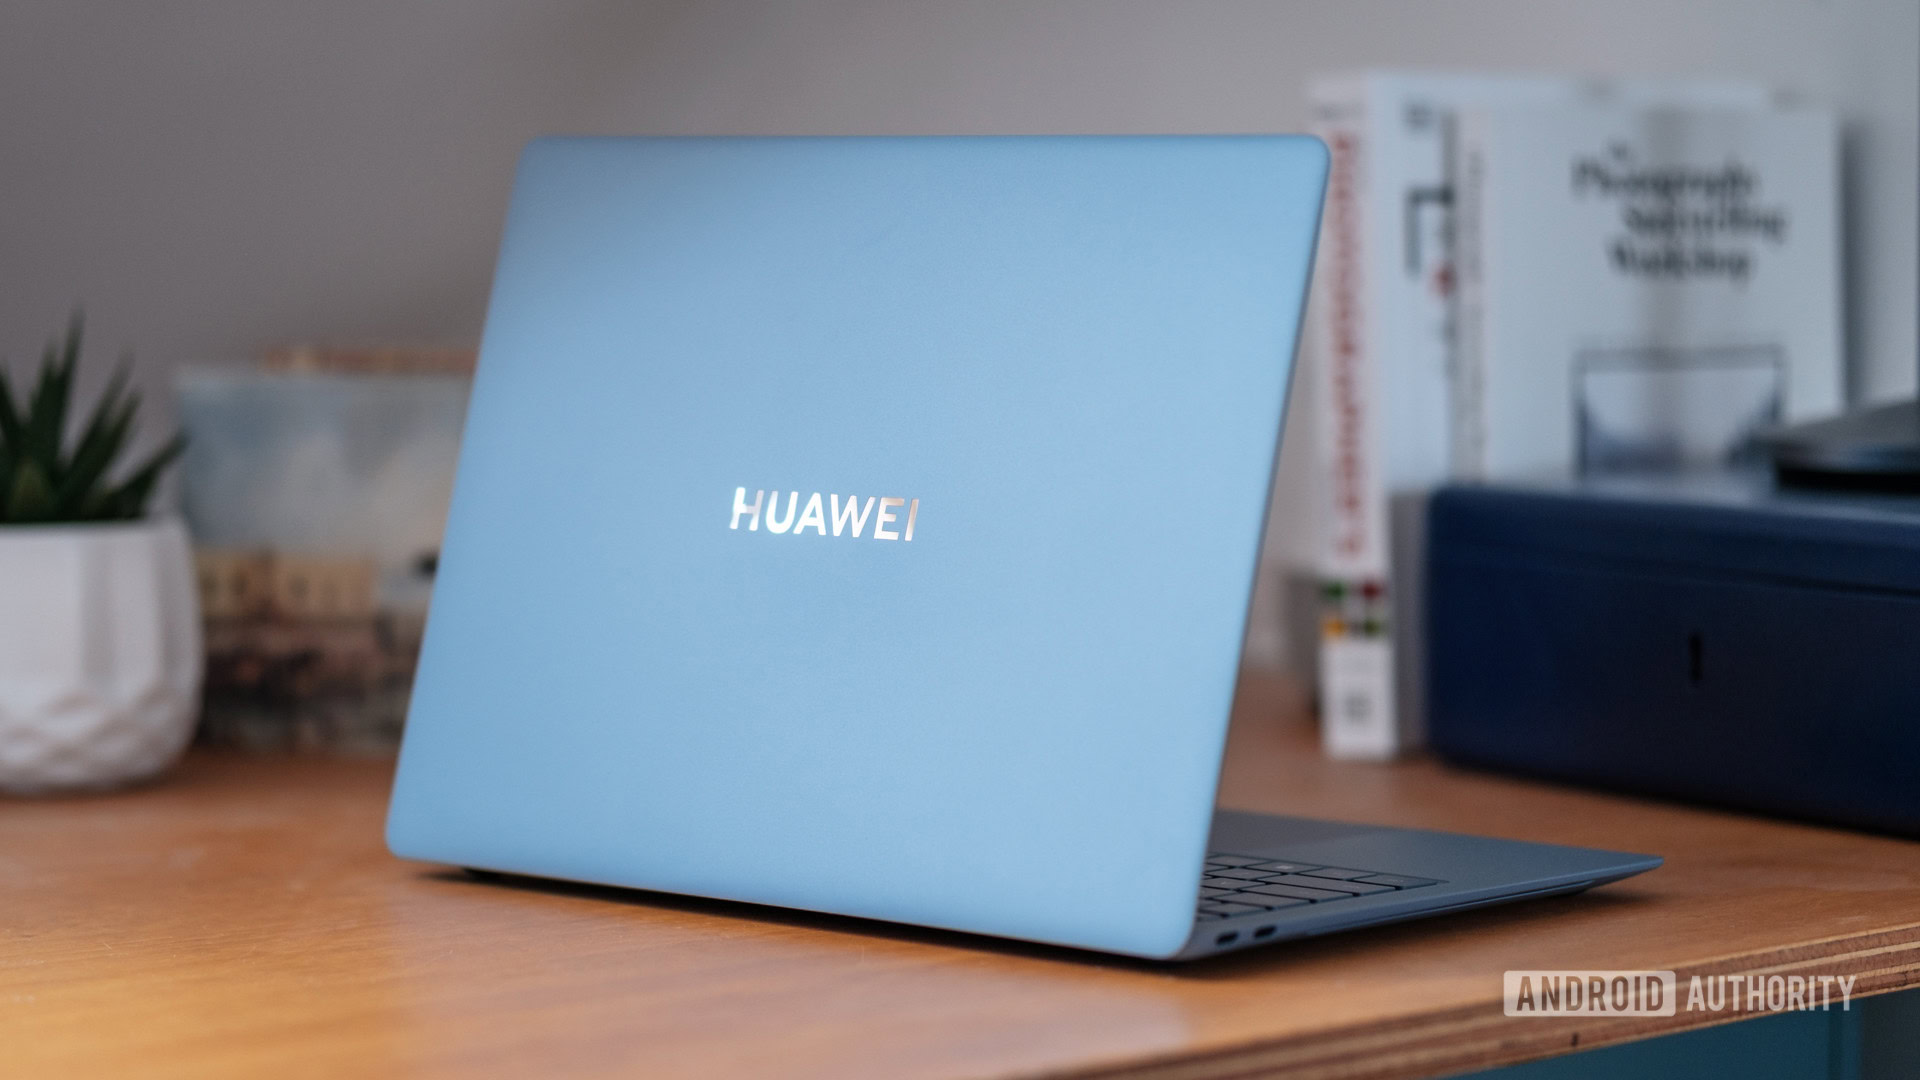 After phones, the US now wants to hurt HUAWEI’s laptop business